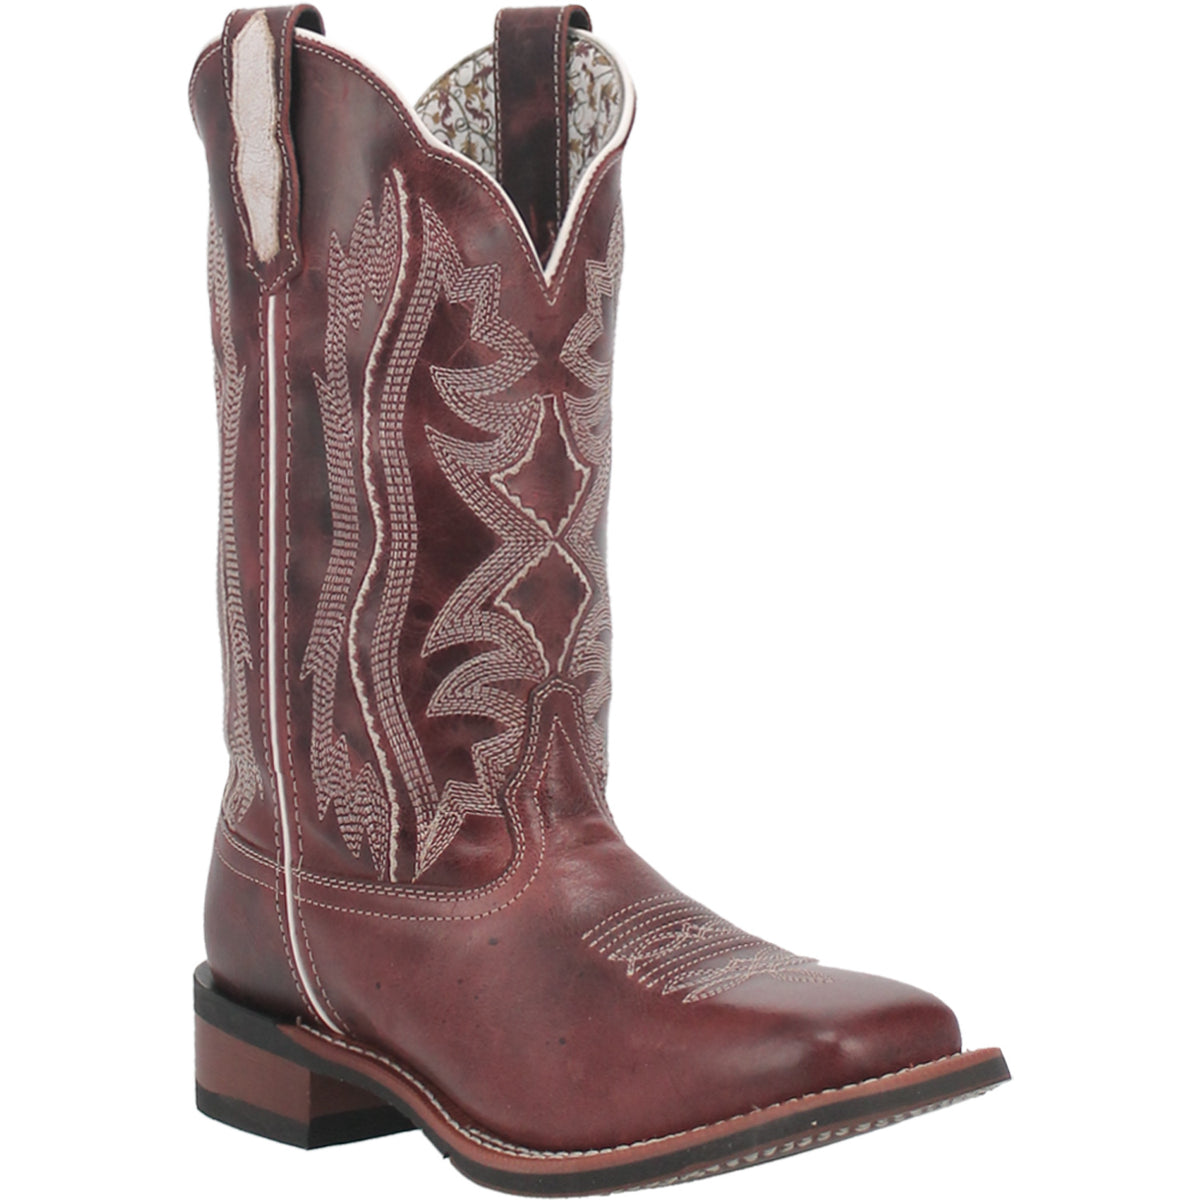 WILLA LEATHER BOOT Cover